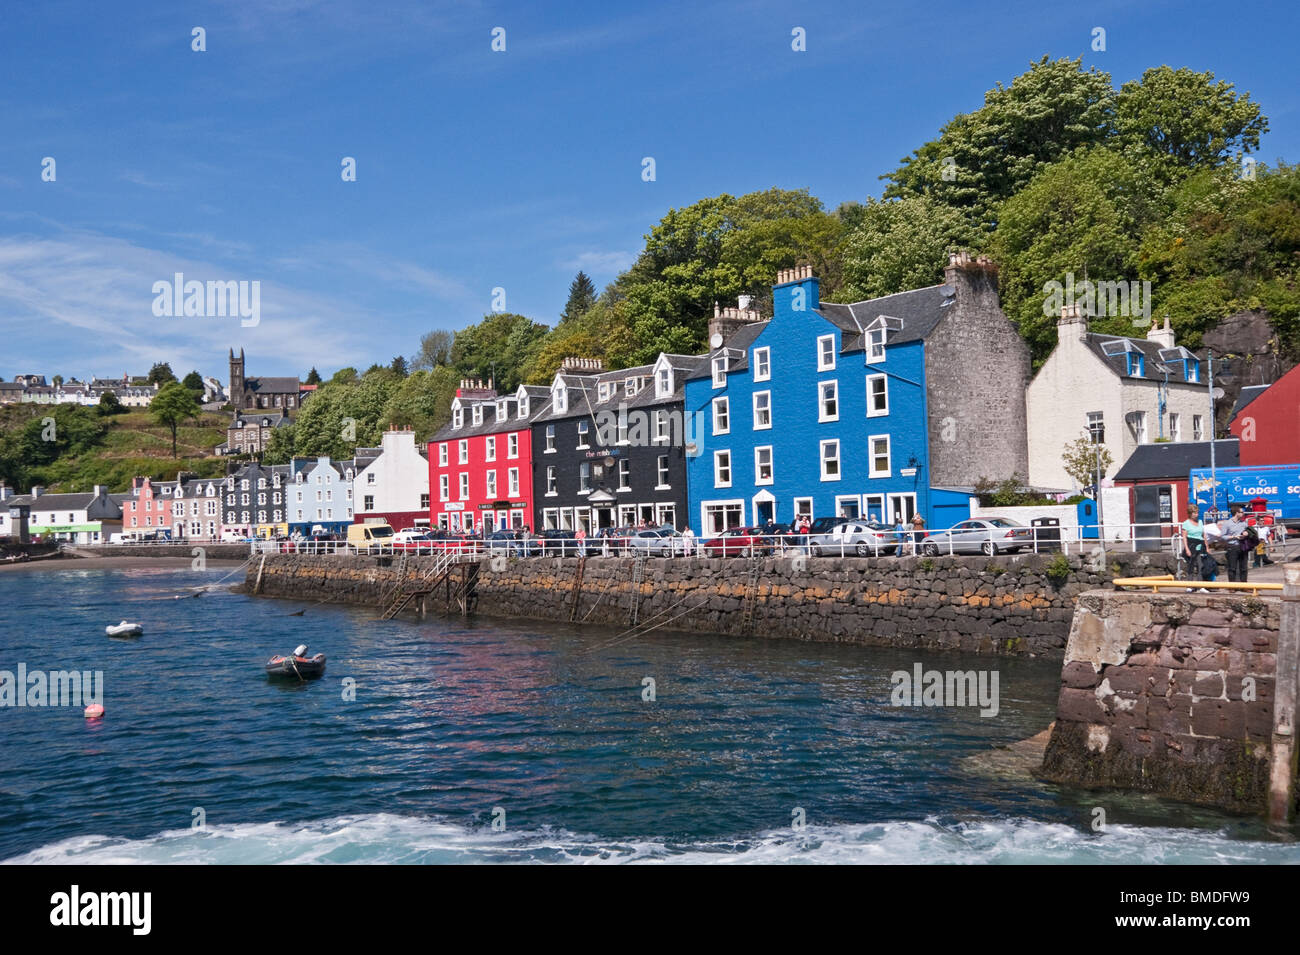 Sea frontage of the small town of Tobermory on the island of Mull in western Scotland Stock Photo